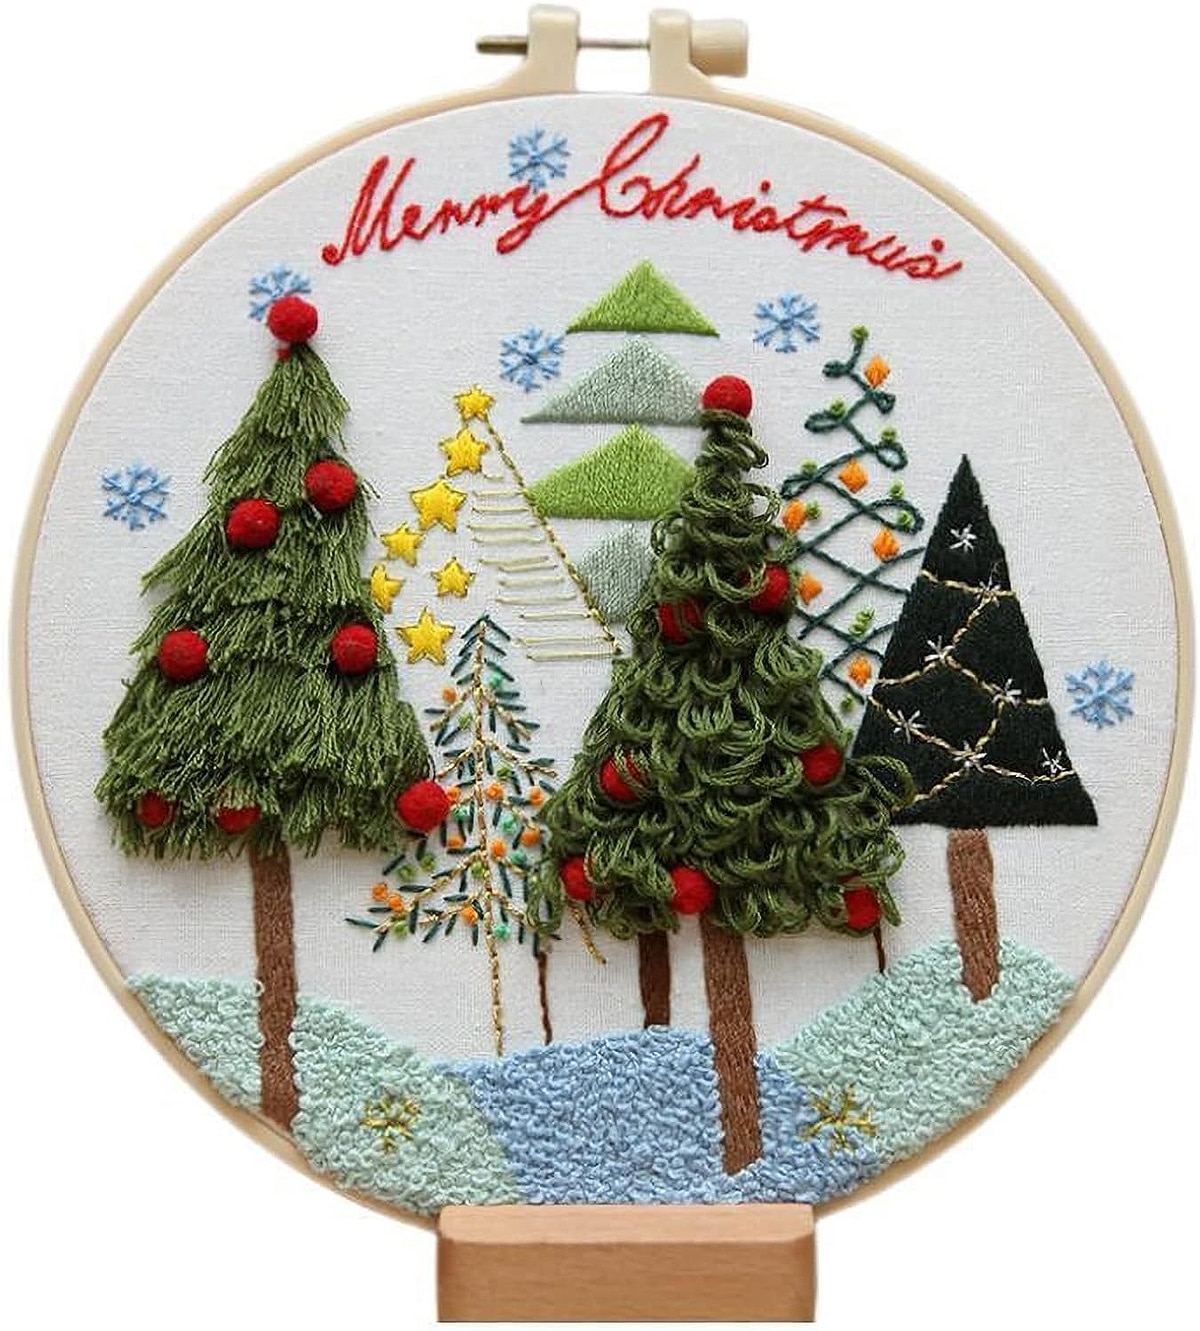 embroidery pattern of Christmas trees